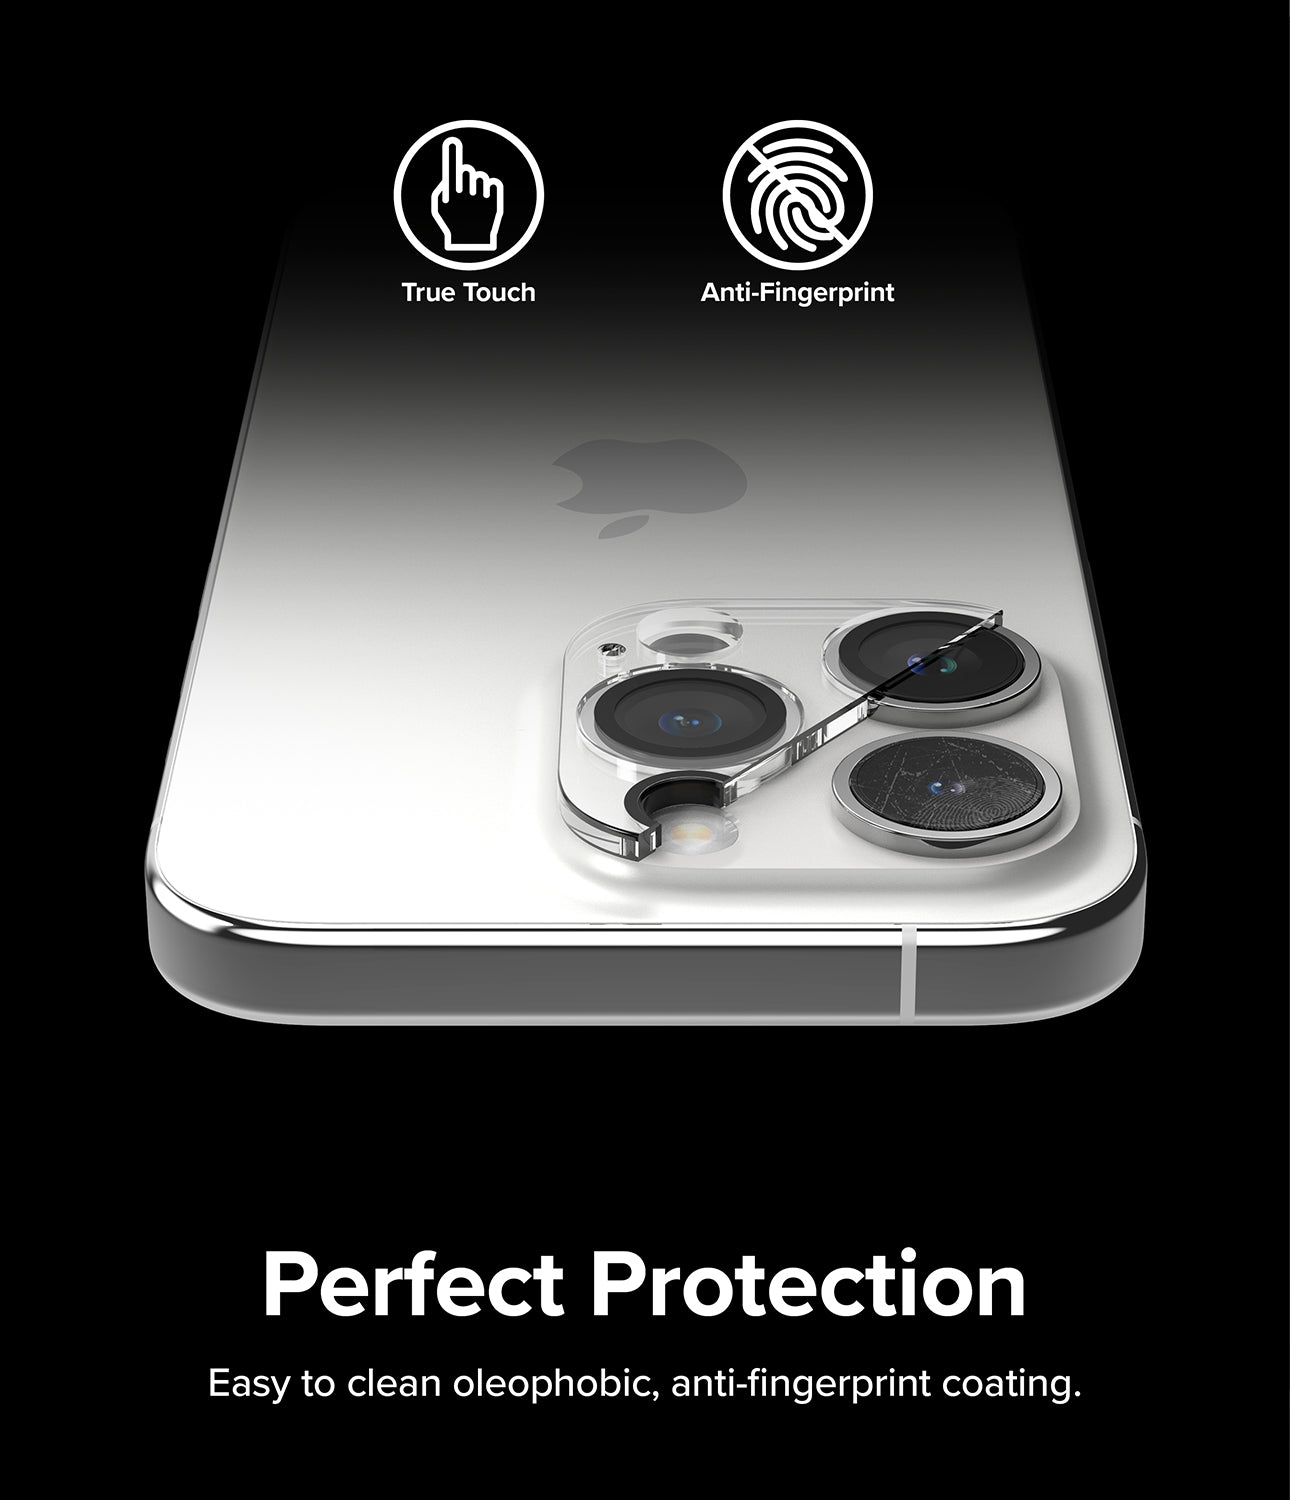 iPhone 15 Pro Max Screen Protector | Full Cover Glass Premium edge-to-edge 9H hardness tempered glass protector